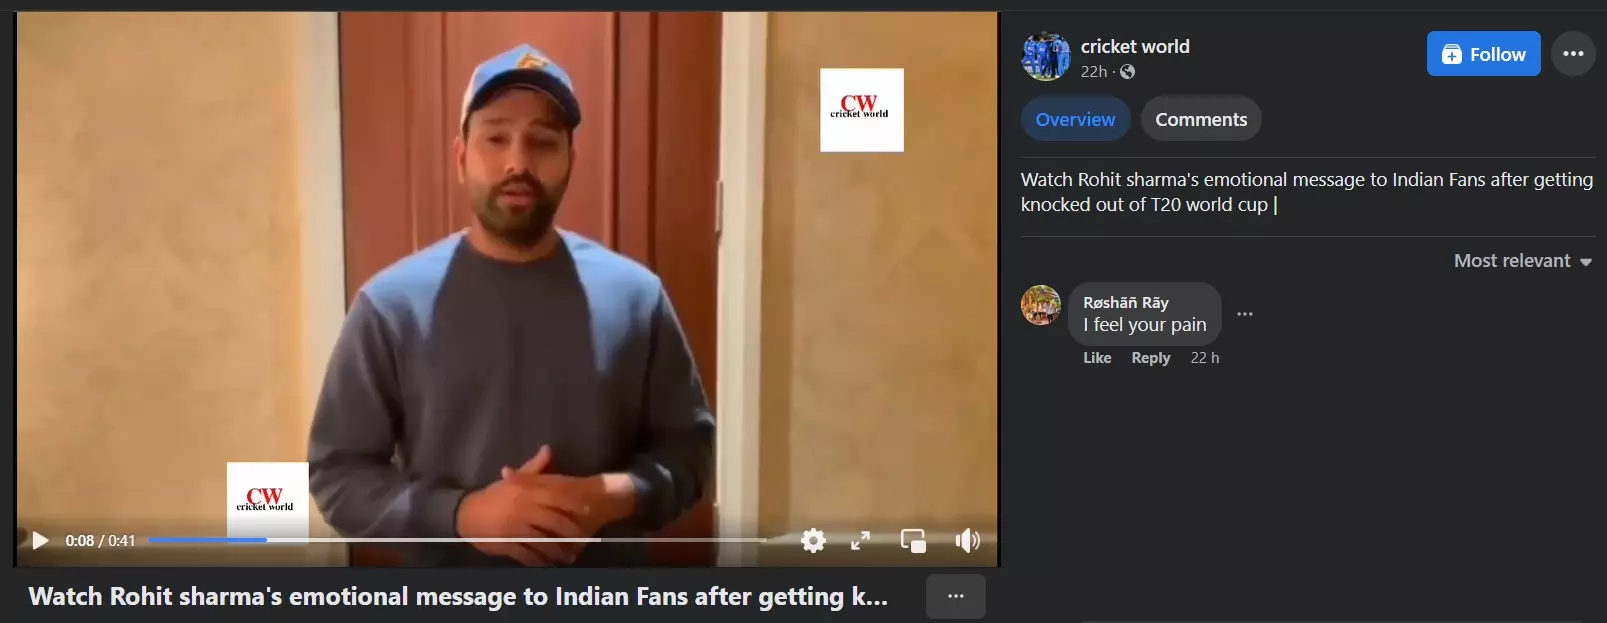 Old Videos Of Indian Cricketers Revived As Recent After T20 Semi Final Loss BOOM